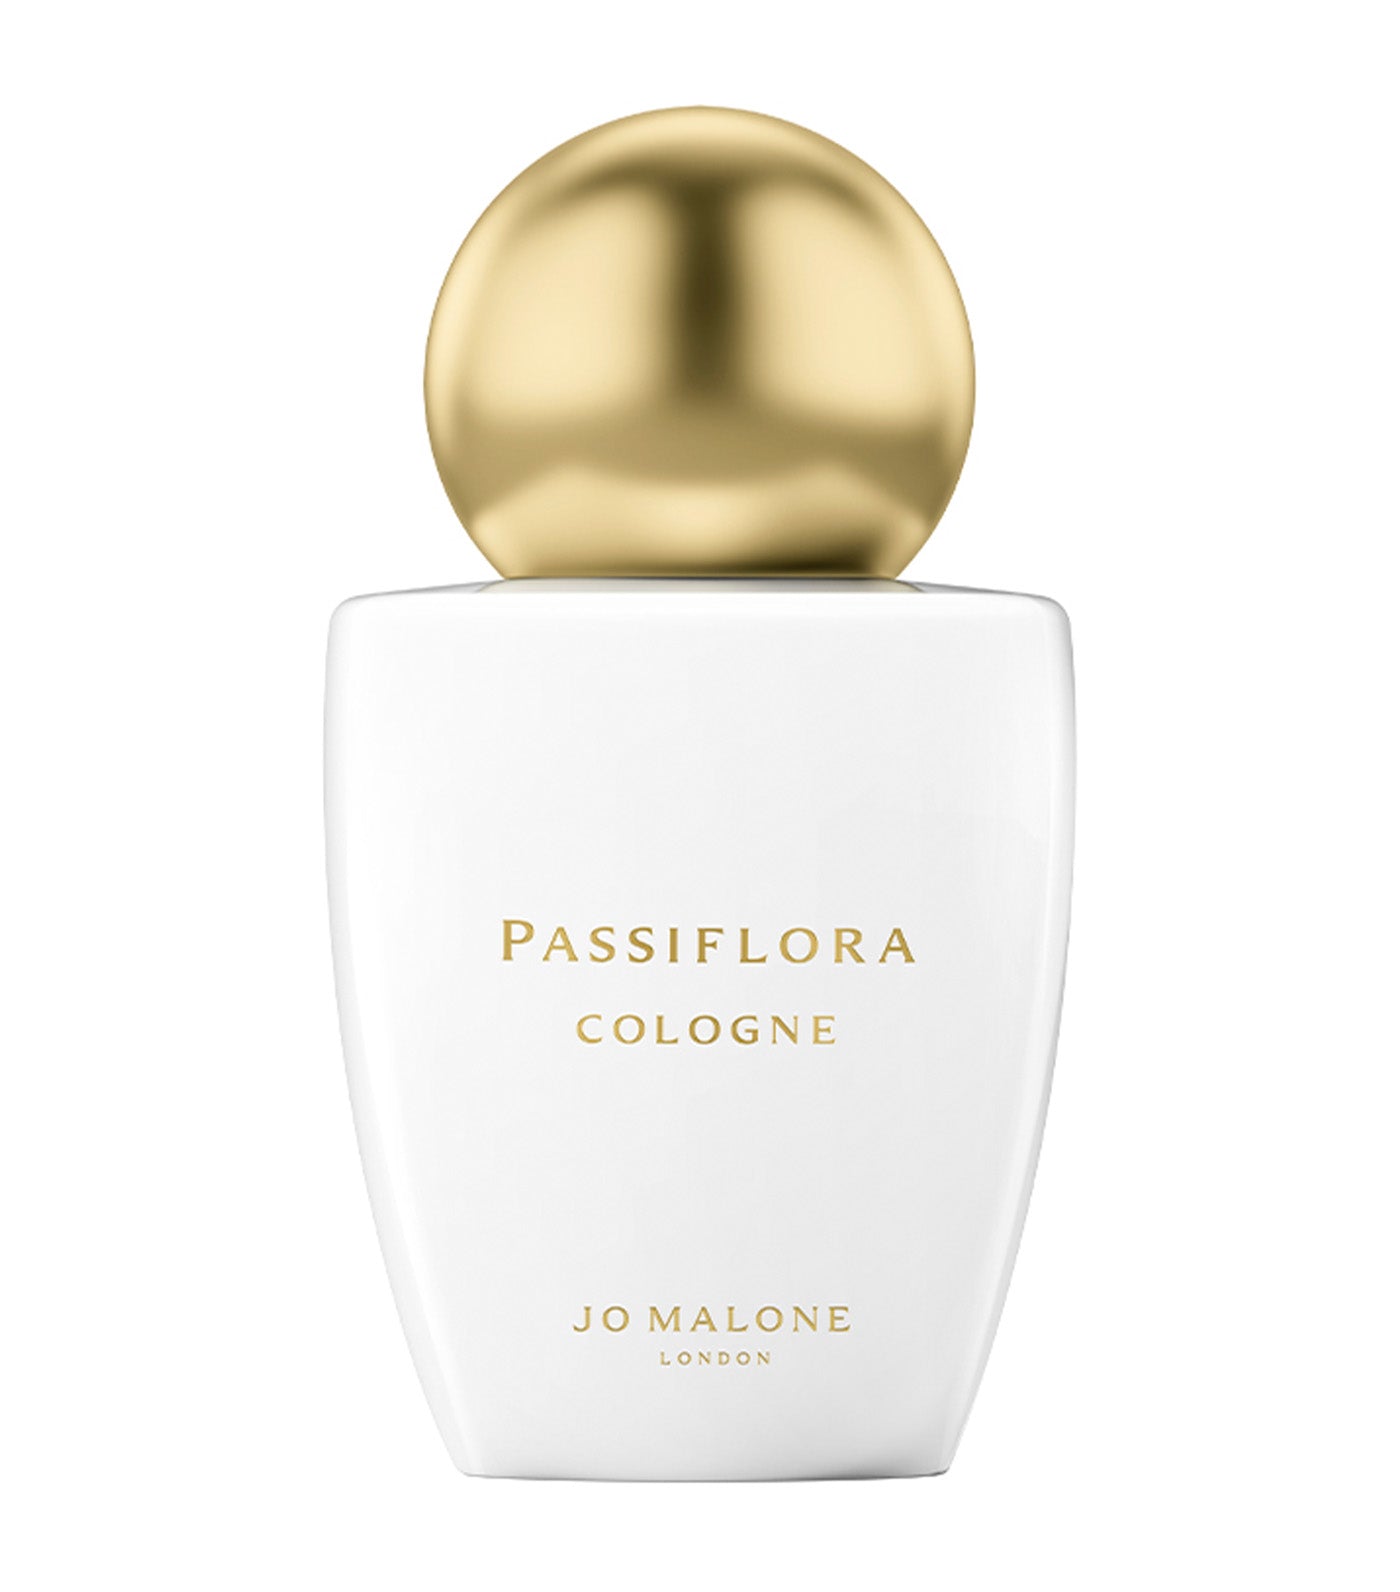 Passiflora Cologne - Limited edition